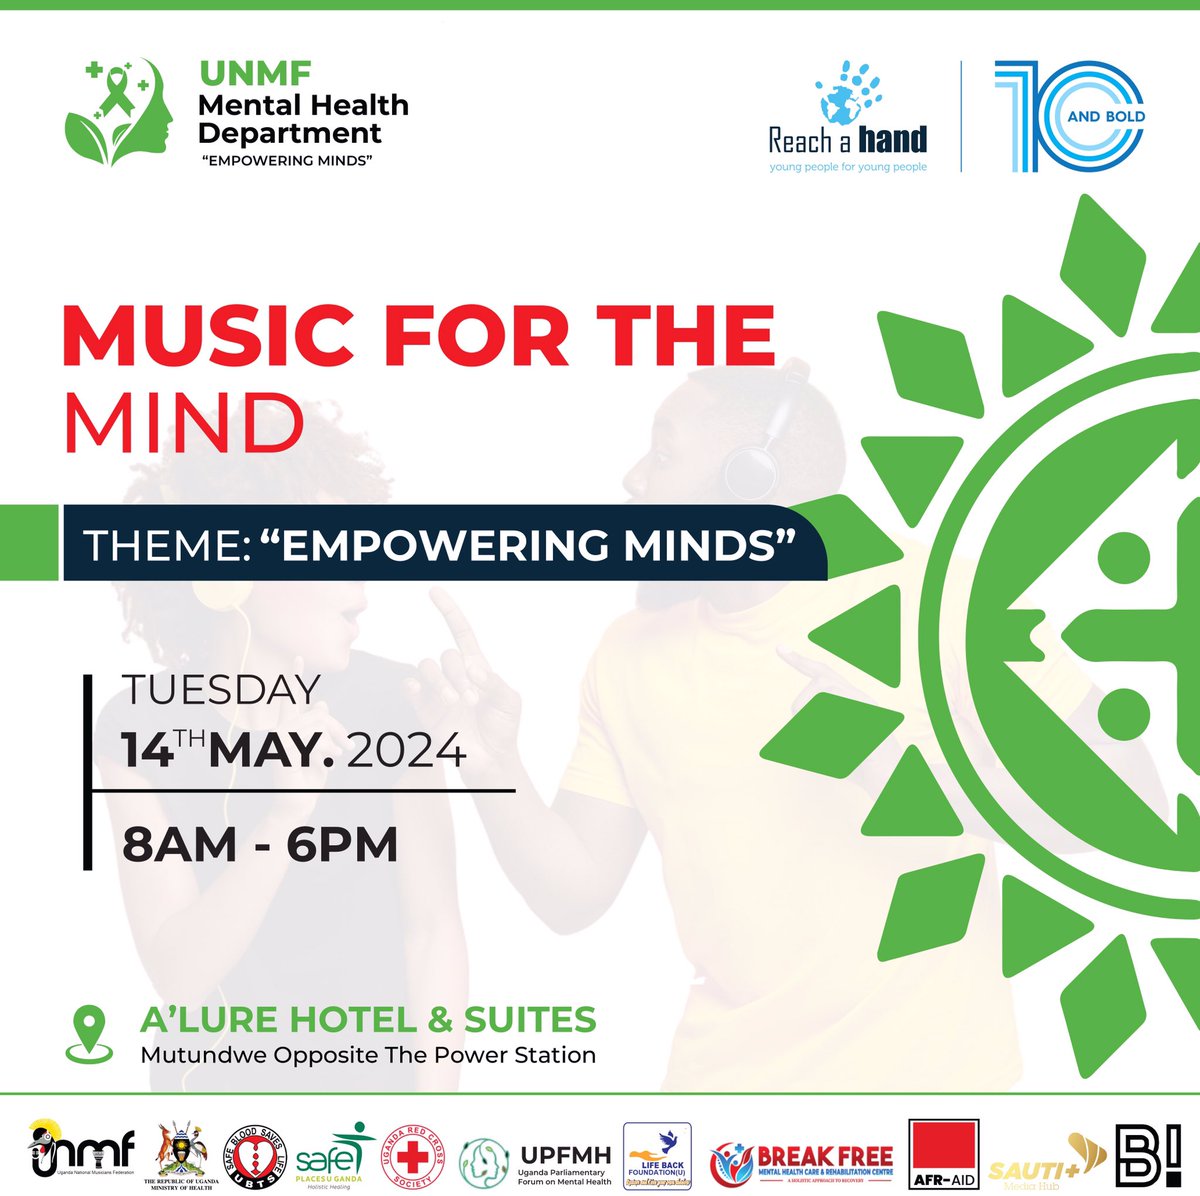 Mental health is crucial in Uganda, affecting people and communities. Creatives like artists, writers, and musicians often face unique mental health challenges. Raising awareness can educate on self-care and stress management. Join us for a FREE Mental Health Event hosted…